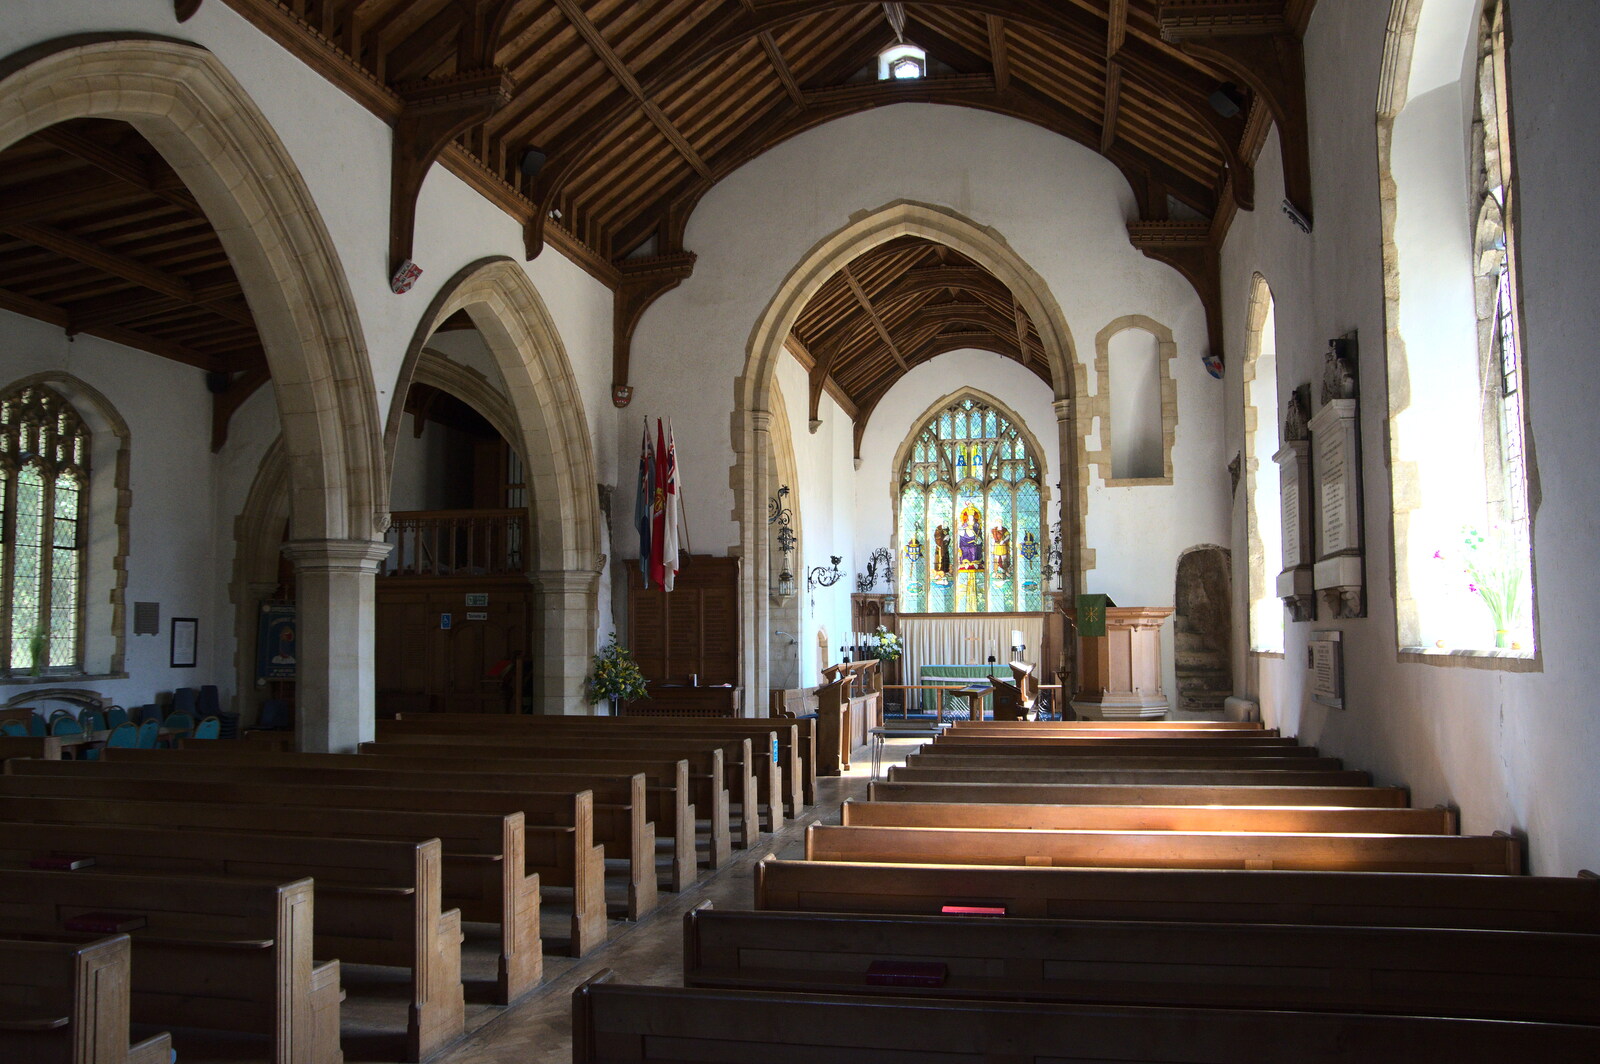 The nice interior of St. Martin's from Camping at Forest Park, Cromer, Norfolk - 12th August 2022